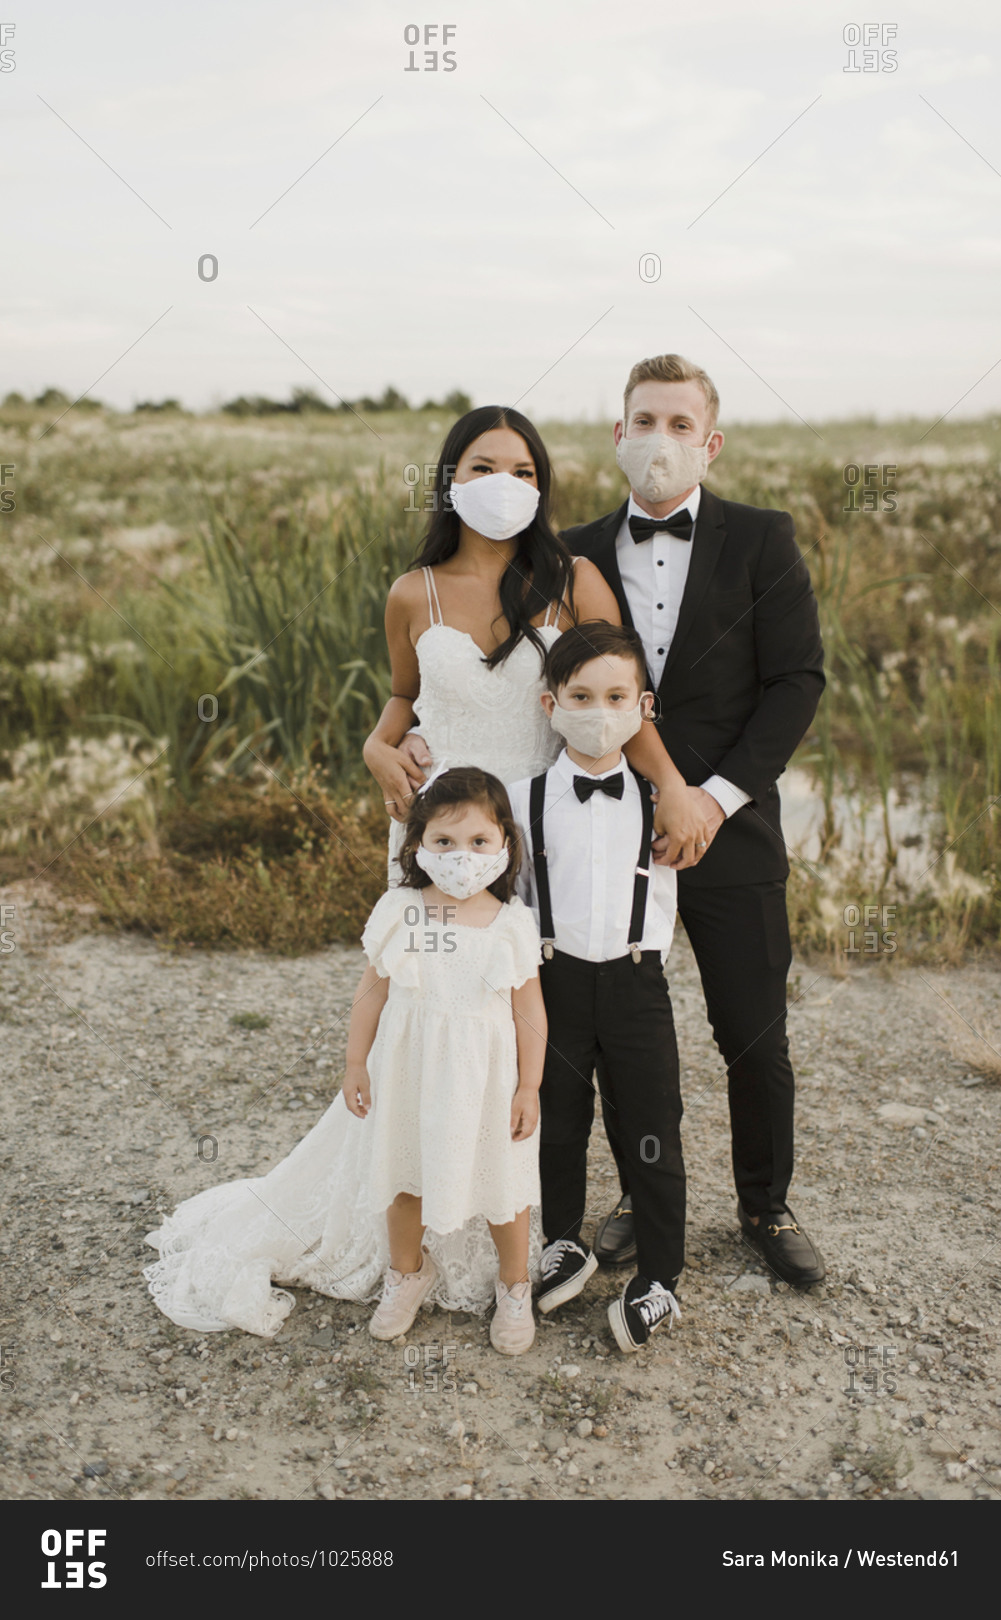 Parents and children in wedding dress wearing protective face mask while standing in field during COVID-19